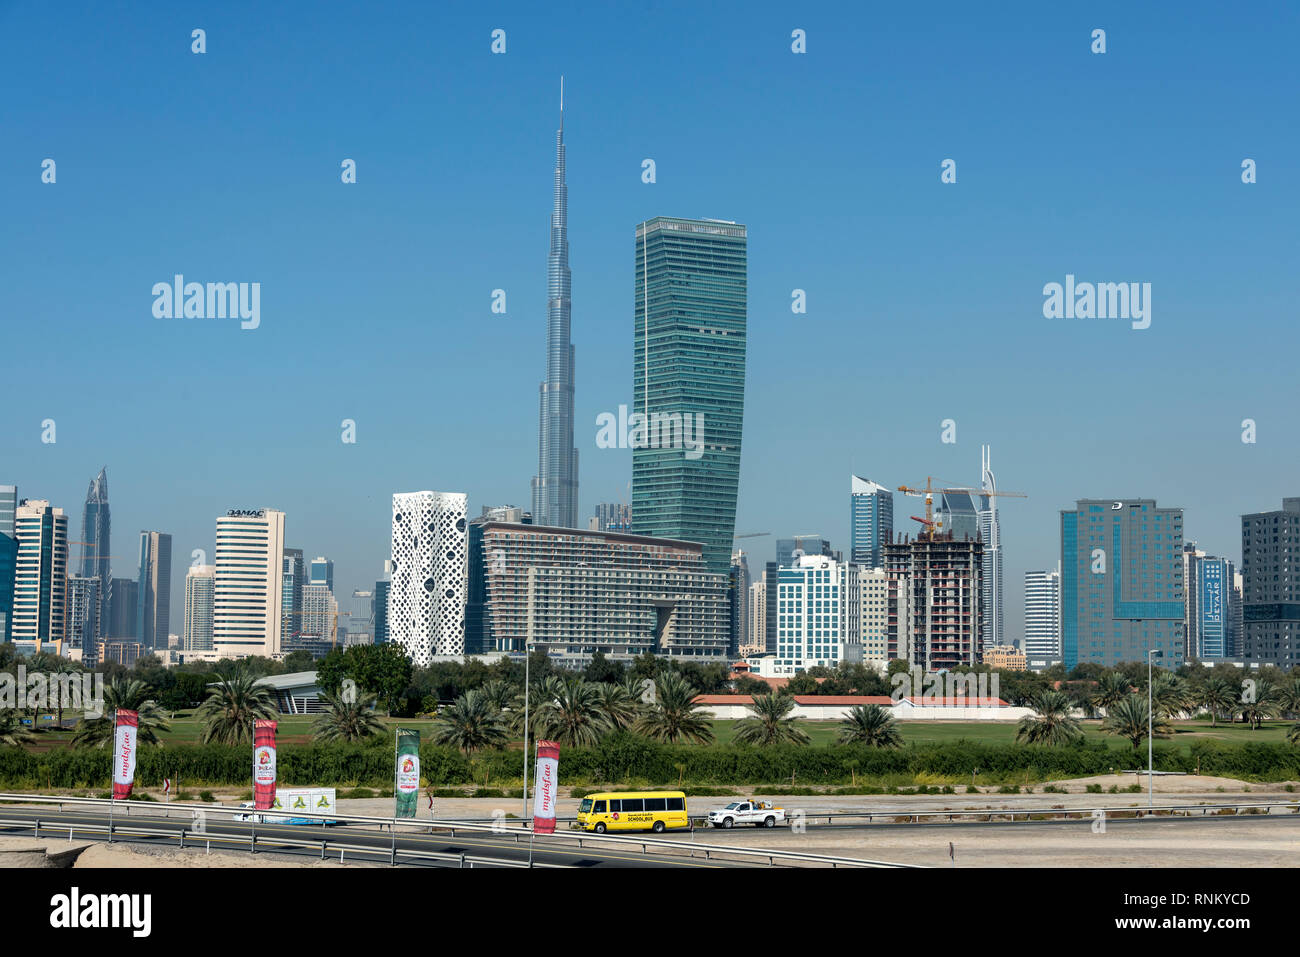 Skyline of downtown Dubai including the tall kilometre high metal structure of the Burj Khalifa, known as the Burj Dubai in downtown Dubai in Dubai in Stock Photo